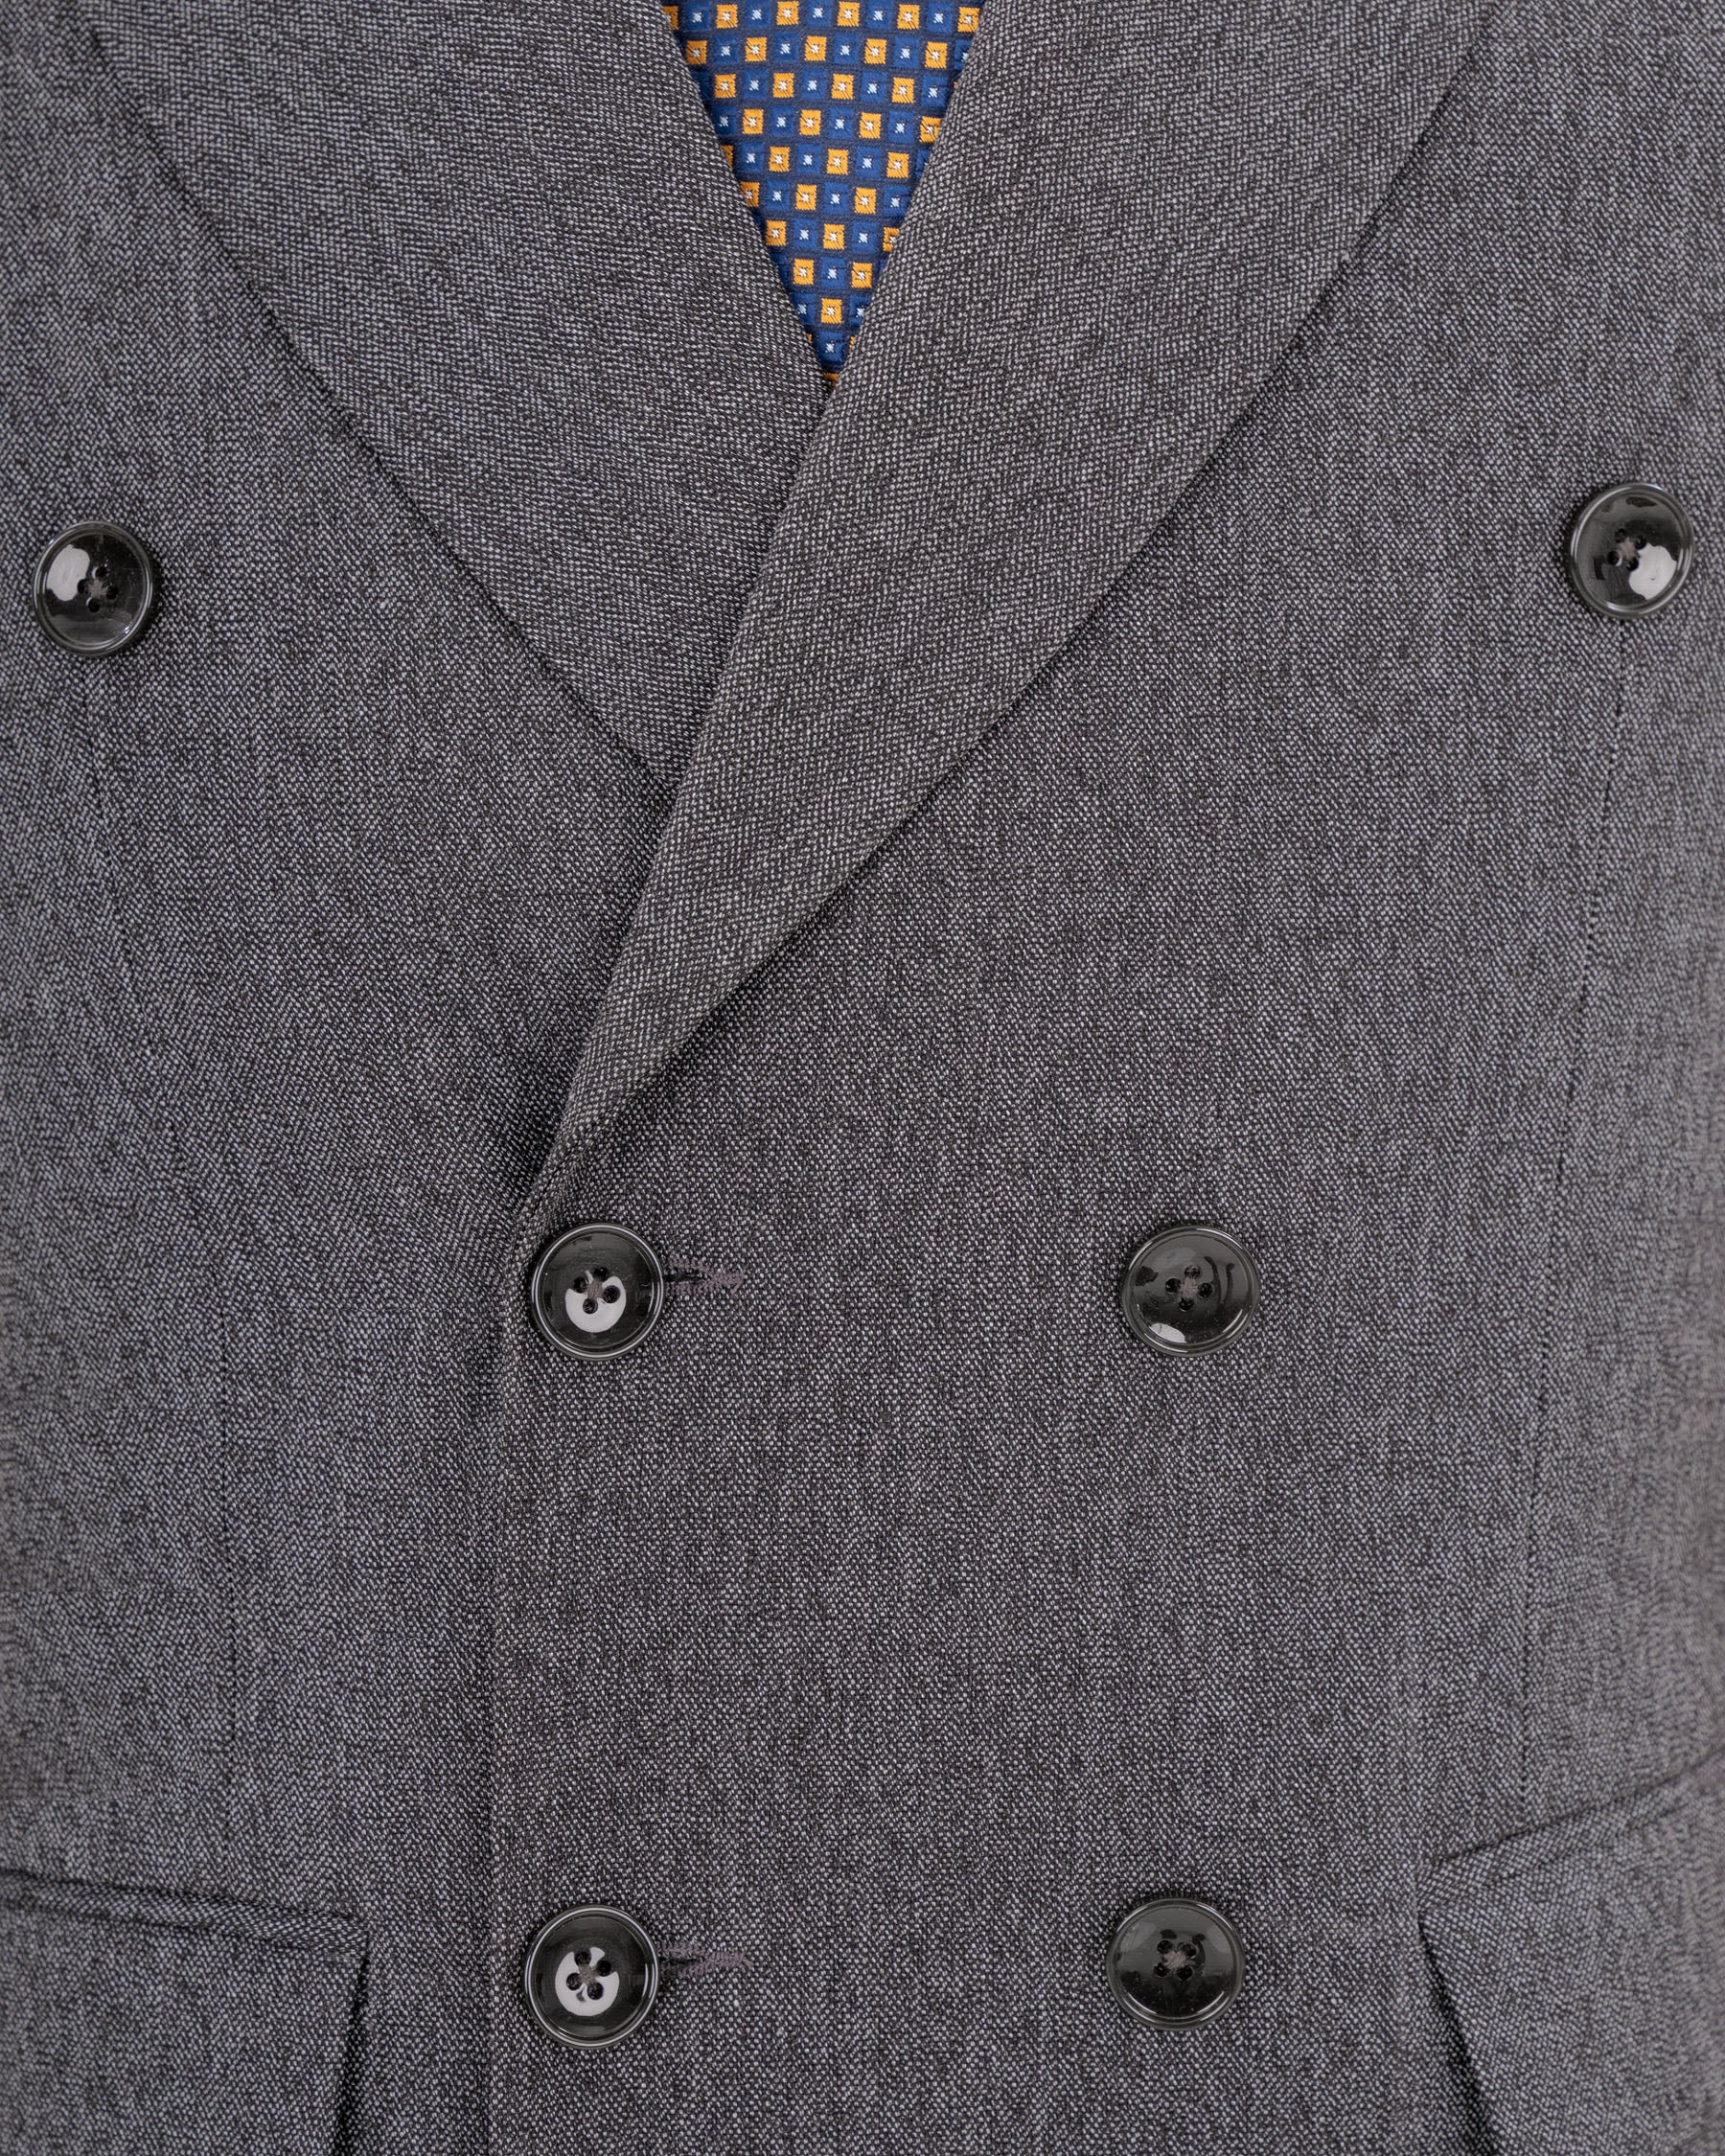 Mobster Grey Double-Breasted Premium Cotton Blazer BL1451-DB-36,BL1451-DB-38,BL1451-DB-40,BL1451-DB-42,BL1451-DB-44,BL1451-DB-46,BL1451-DB-48,BL1451-DB-50,BL1451-DB-52,BL1451-DB-54,BL1451-DB-56,BL1451-DB-58,BL1451-DB-60